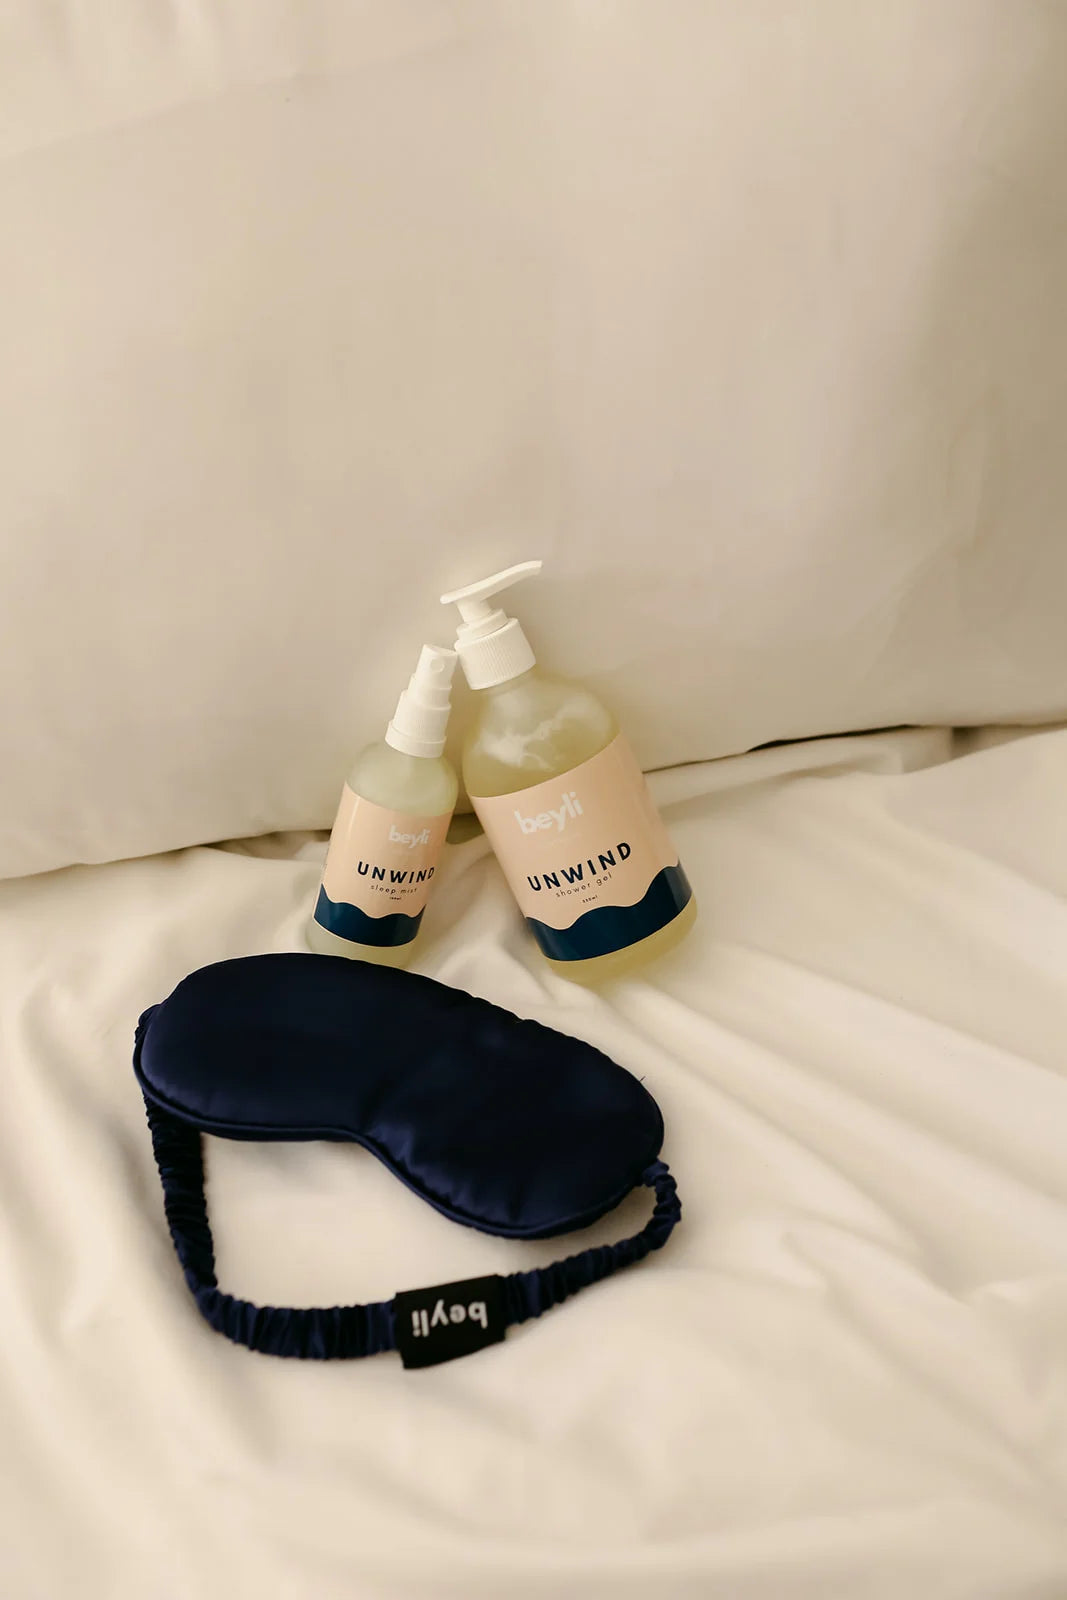 A memory foam sleep eye mask with a bottle of hand sanitizer on a soft bedspread